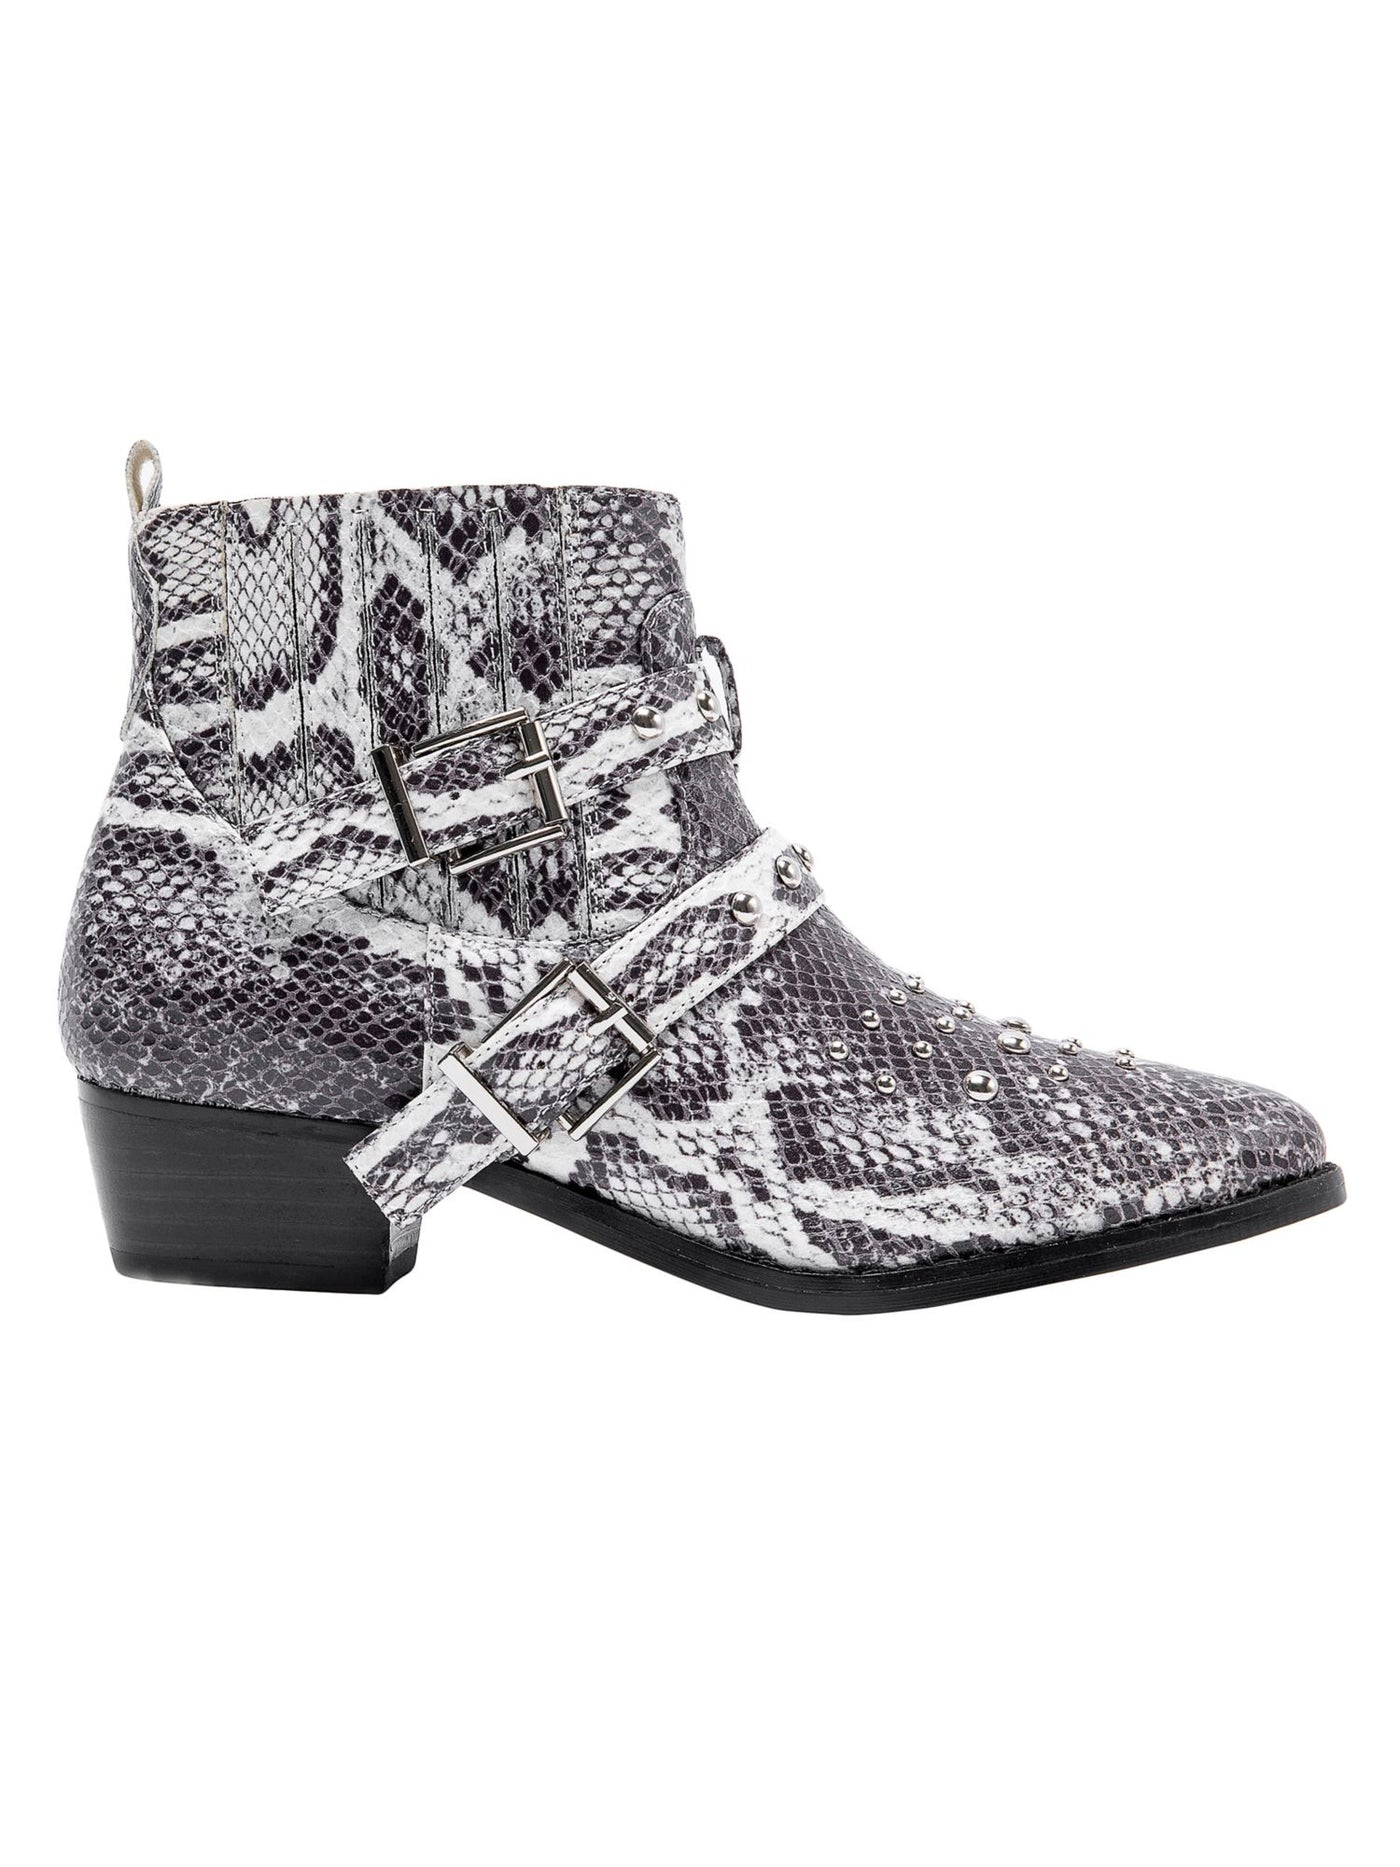 JANE AND THE SHOE Womens Black Snake Print Cindy Pointed Toe Block Heel Zip-Up Western Boot 9